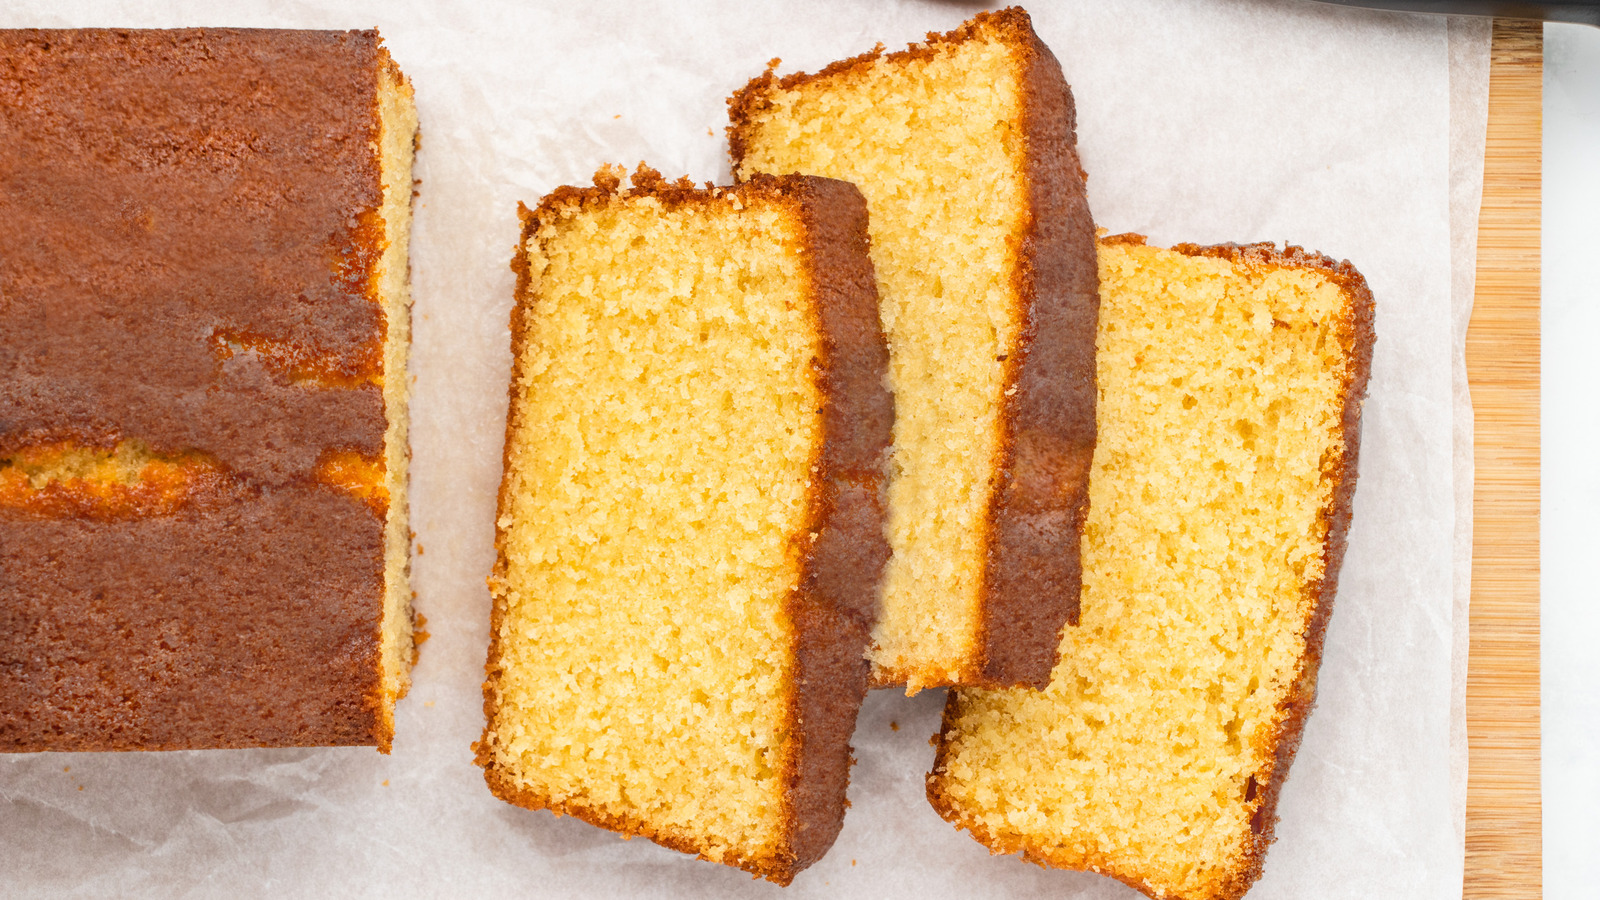 https://www.thedailymeal.com/img/gallery/classic-buttery-pound-cake-recipe/l-intro-1672348898.jpg